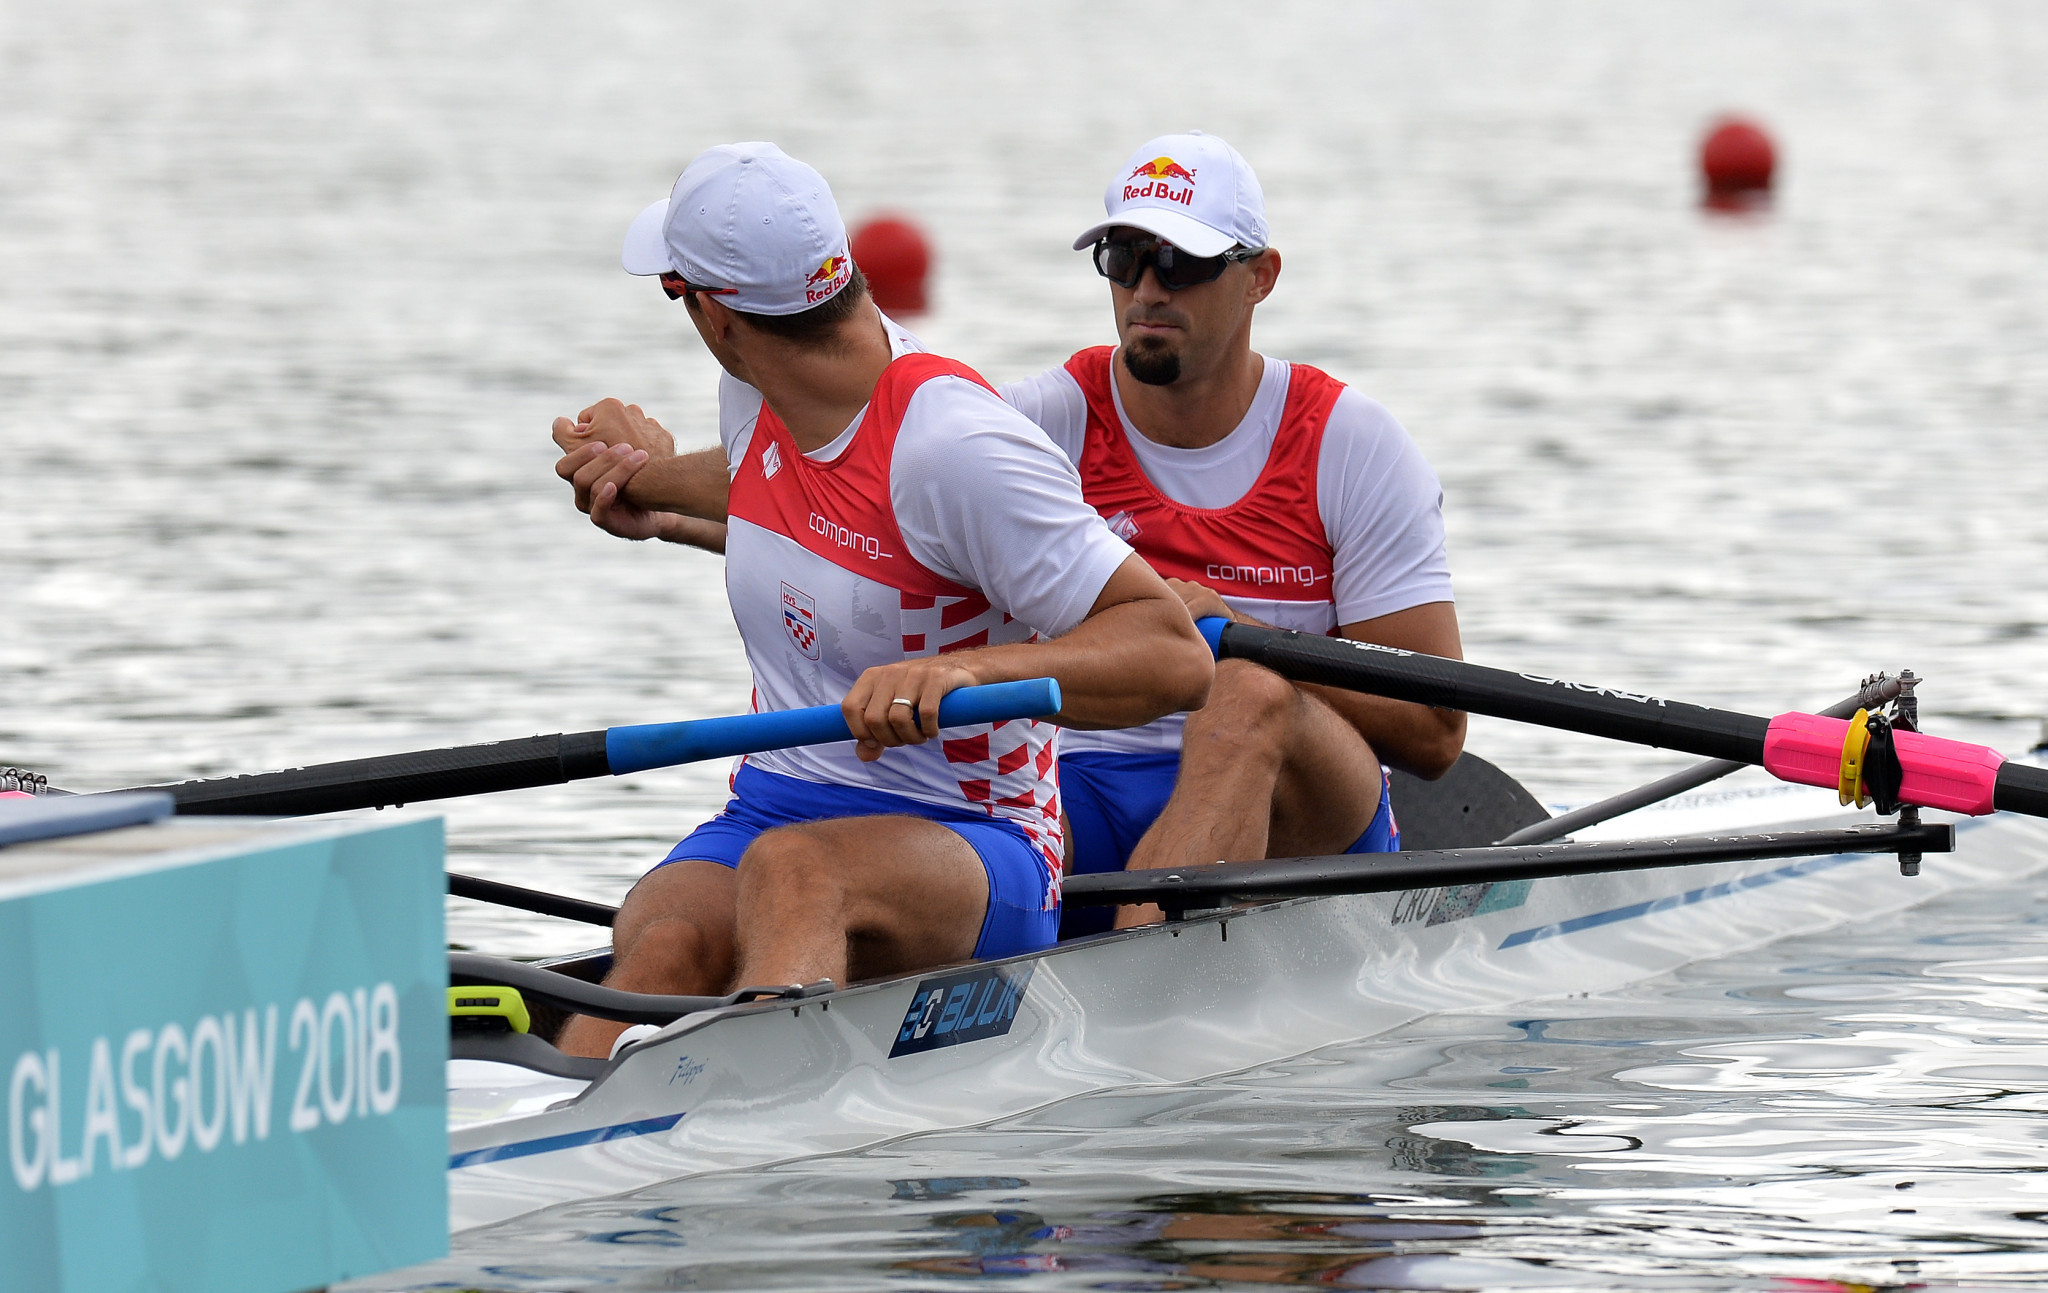 Sinković brothers through to semi-finals at weather-affected World Rowing Cup 